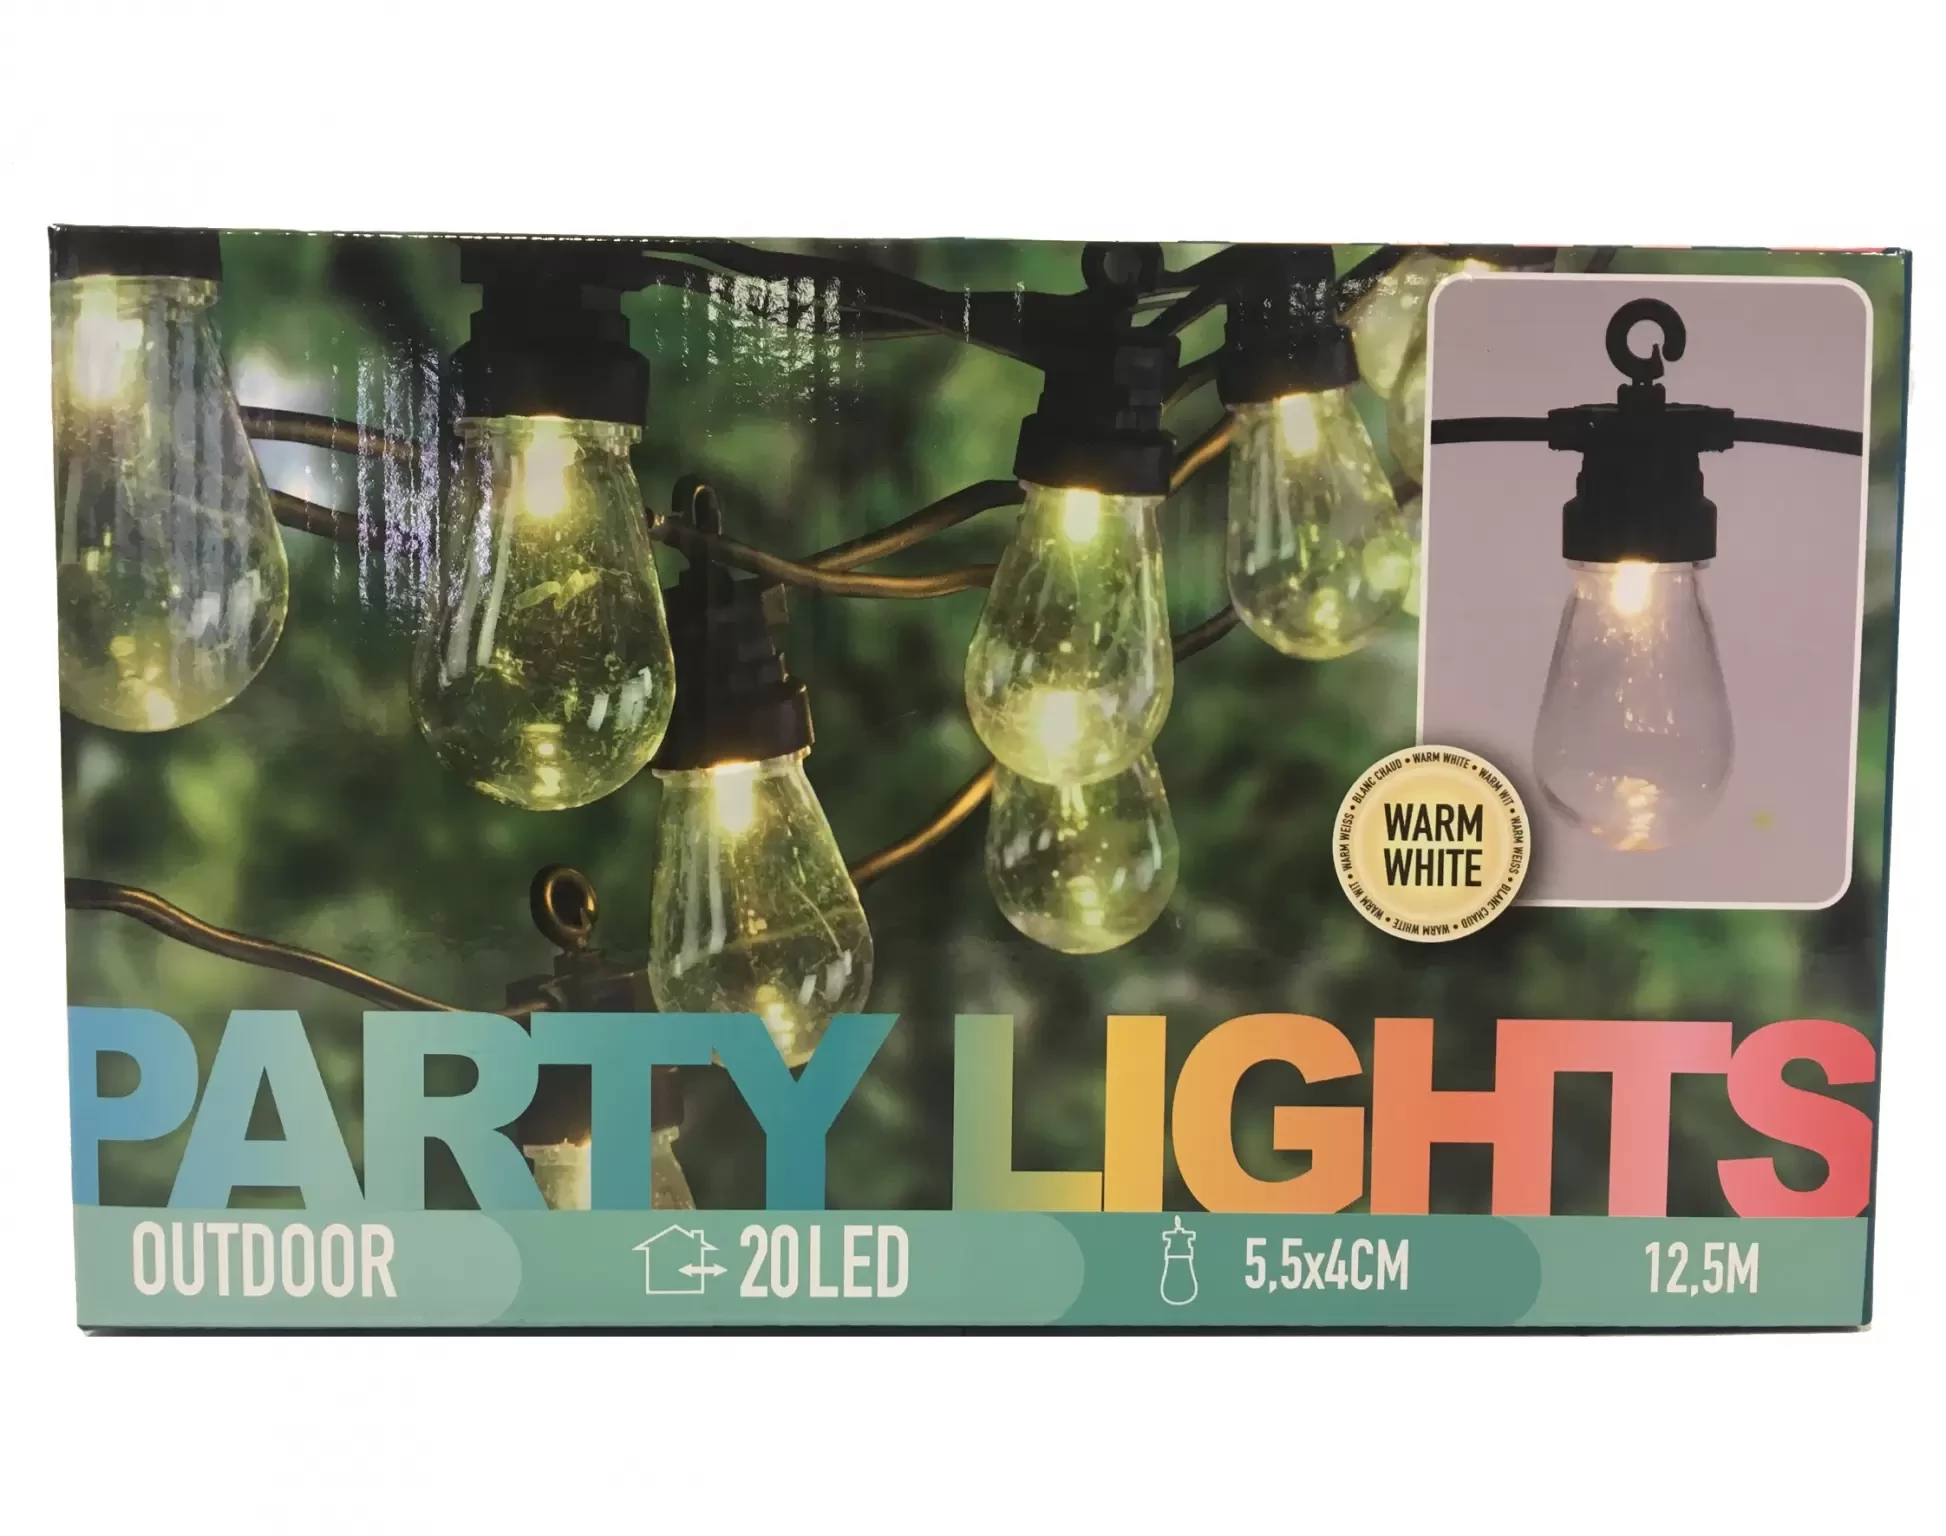 Partylights 20 LED 12,5m